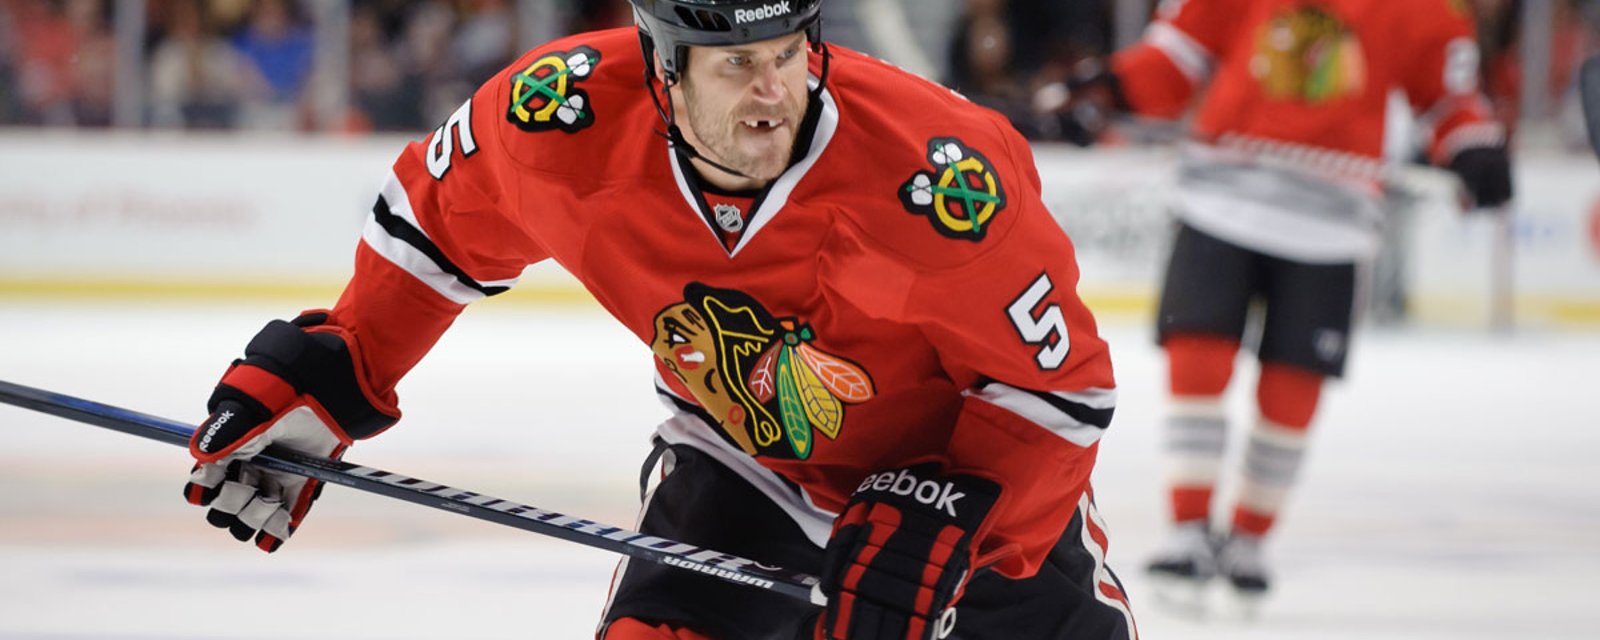 NHL makes despicable and disgusting statement on Montador’s death 